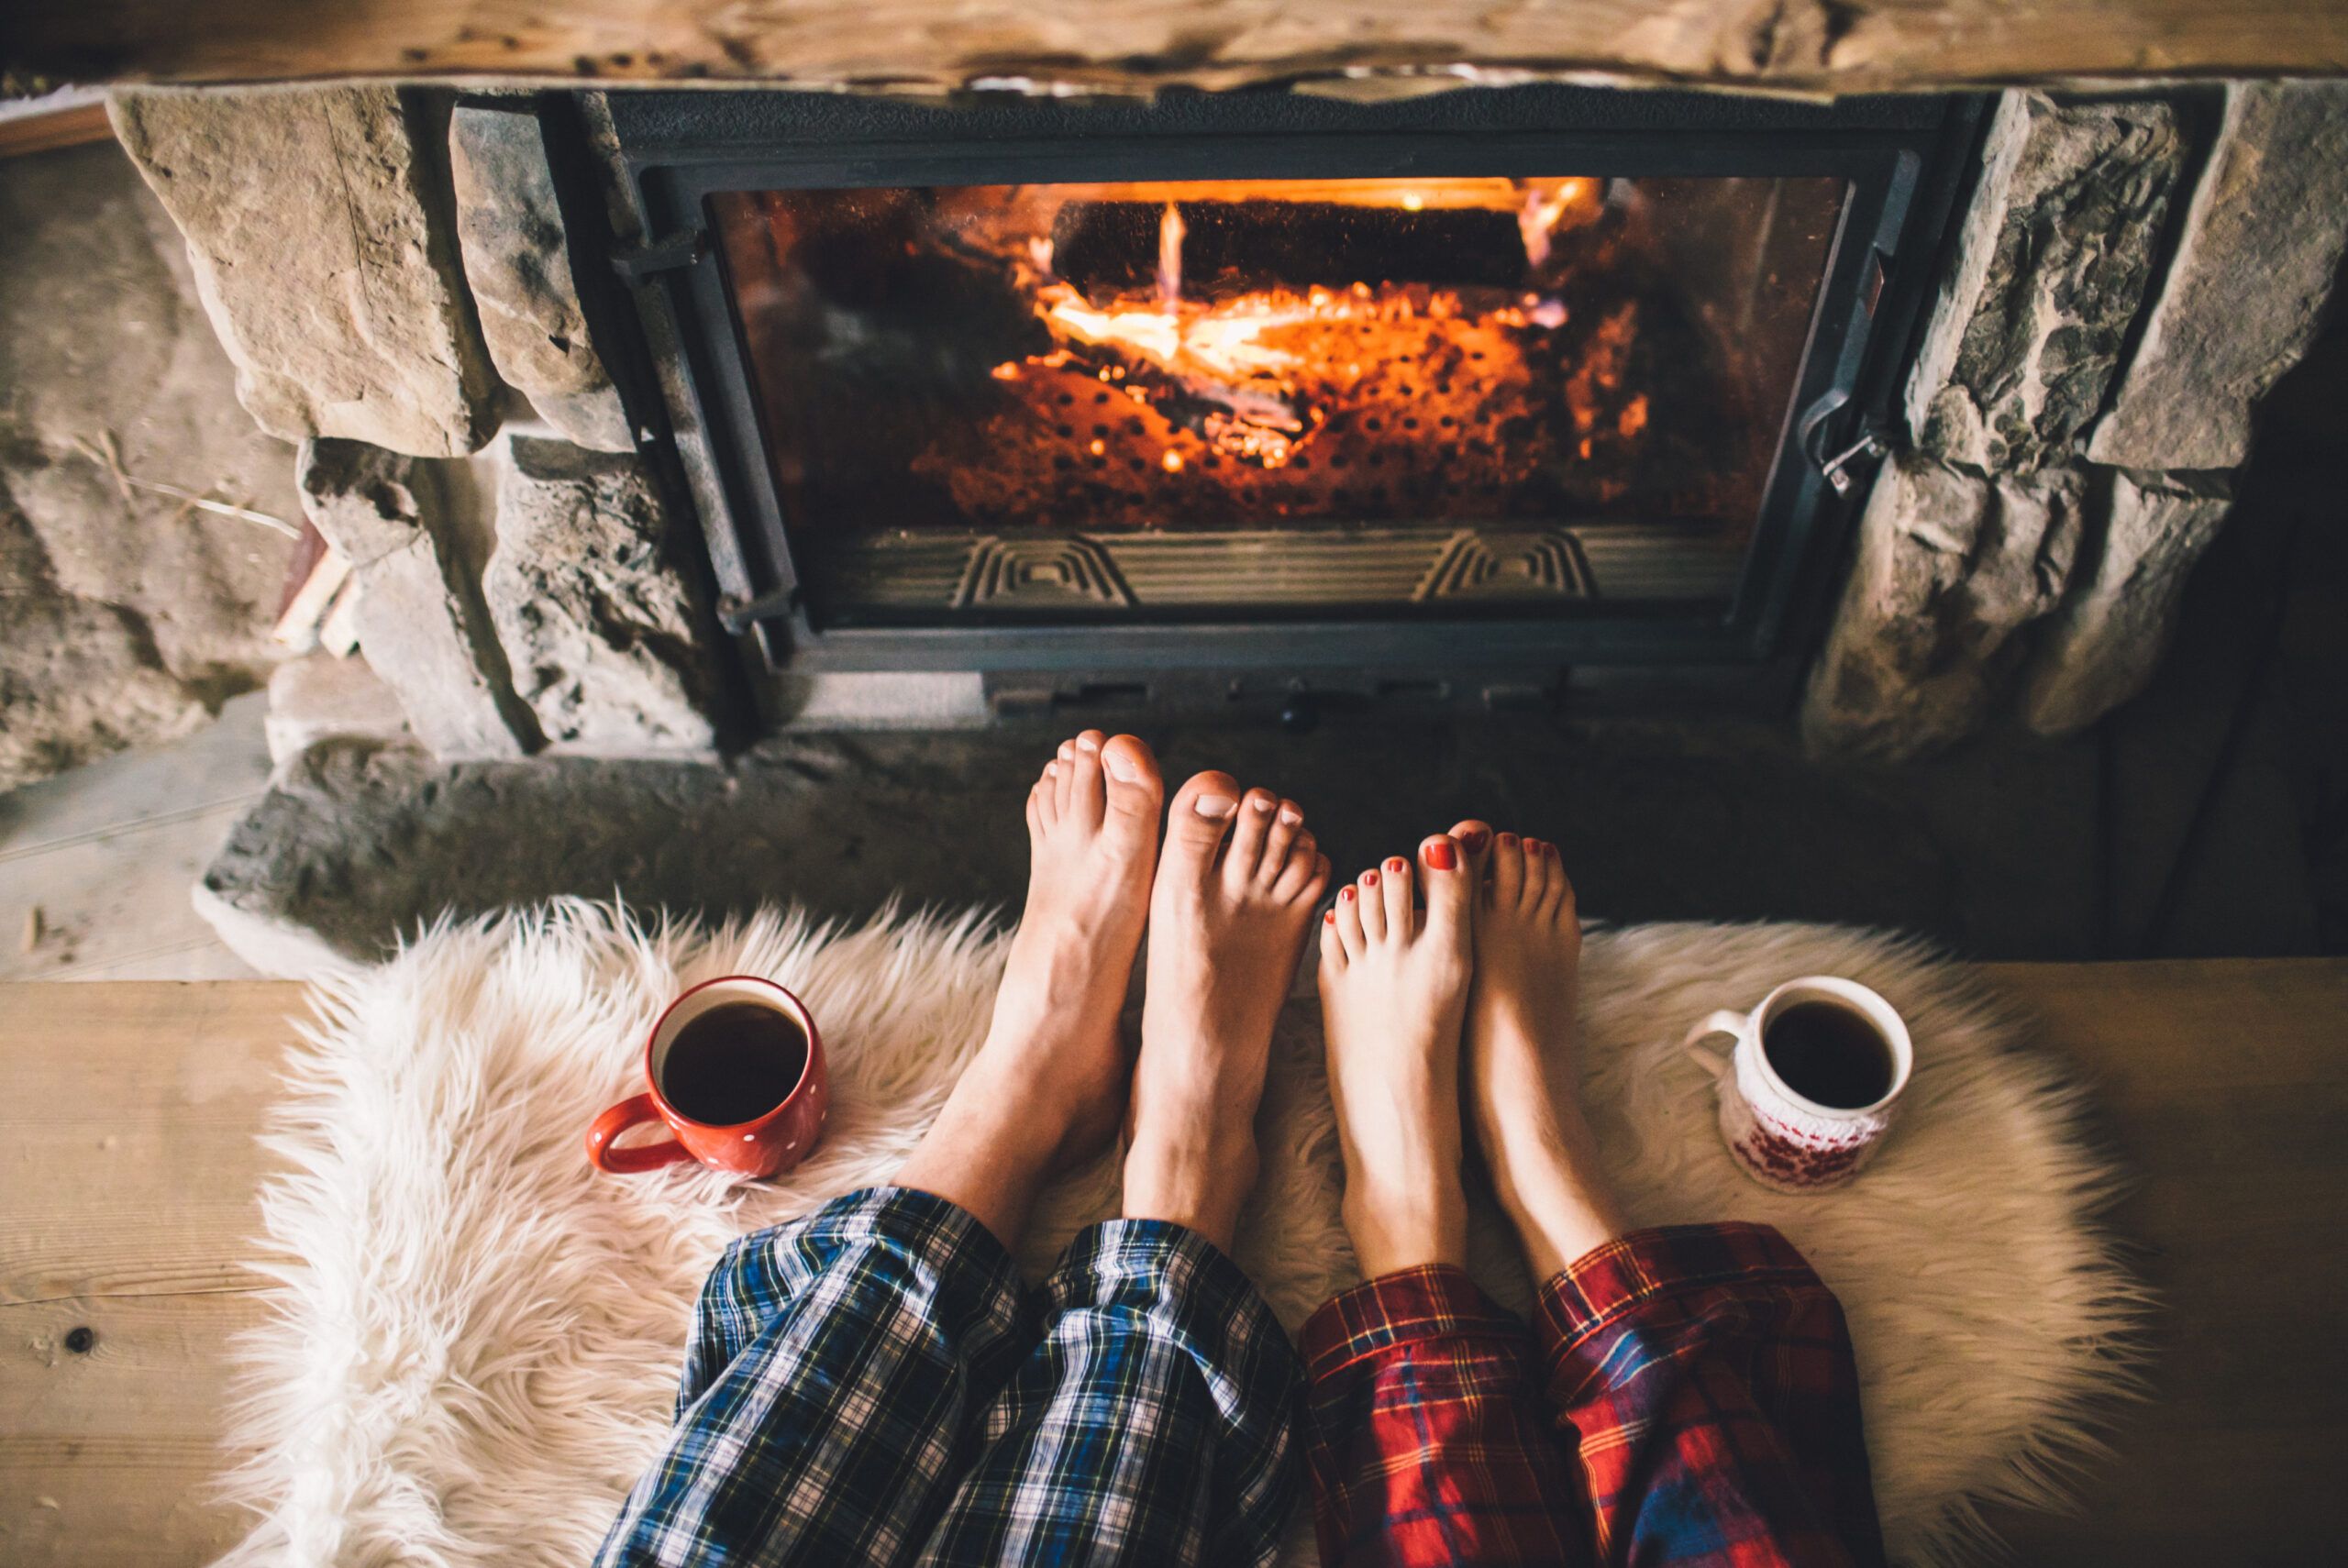 How To Spend the Perfect Cozy Autumn Evening At Home